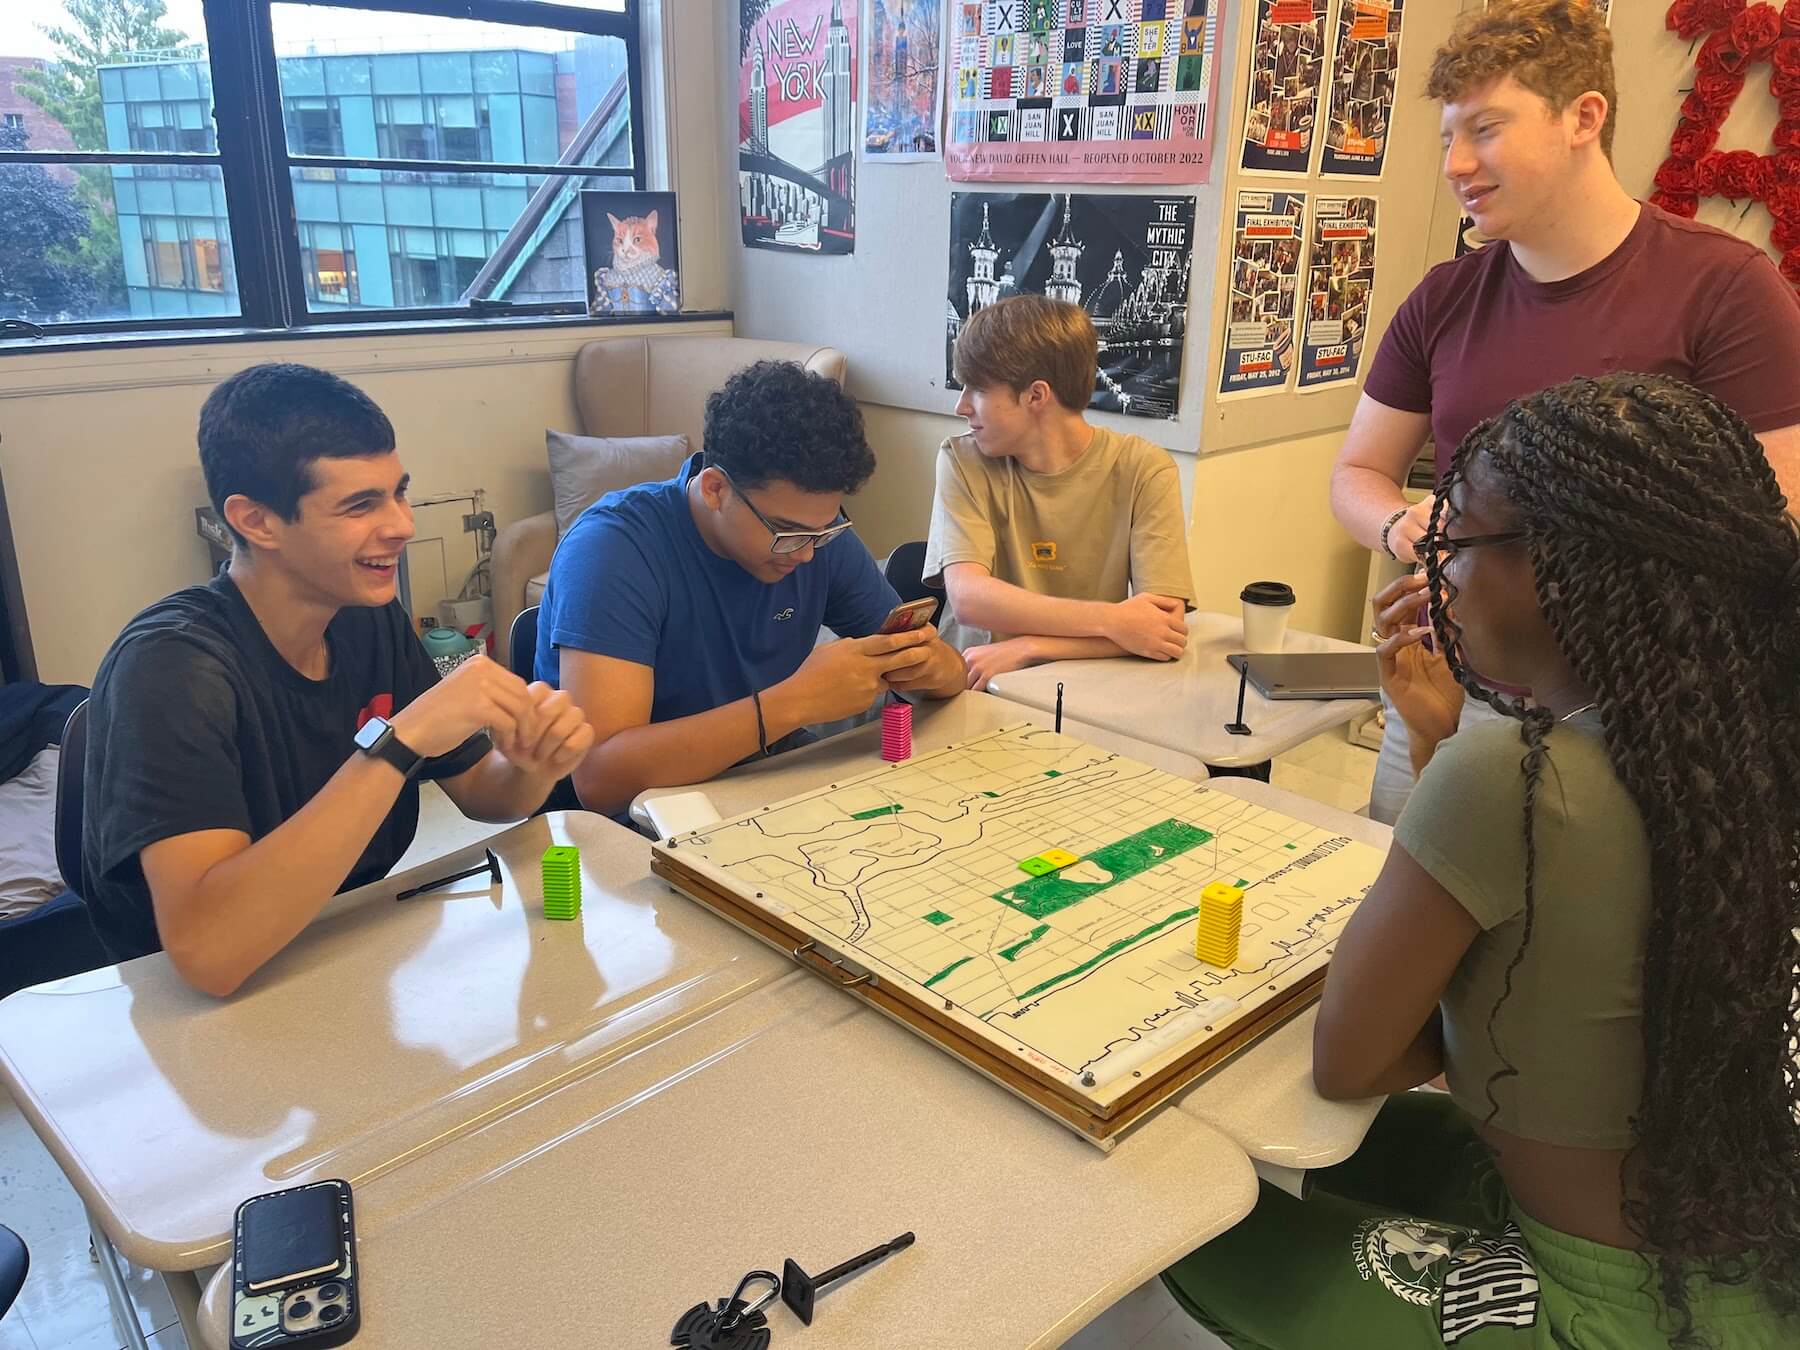 Ethical Culture Fieldston School students work on a City Semester assignment.